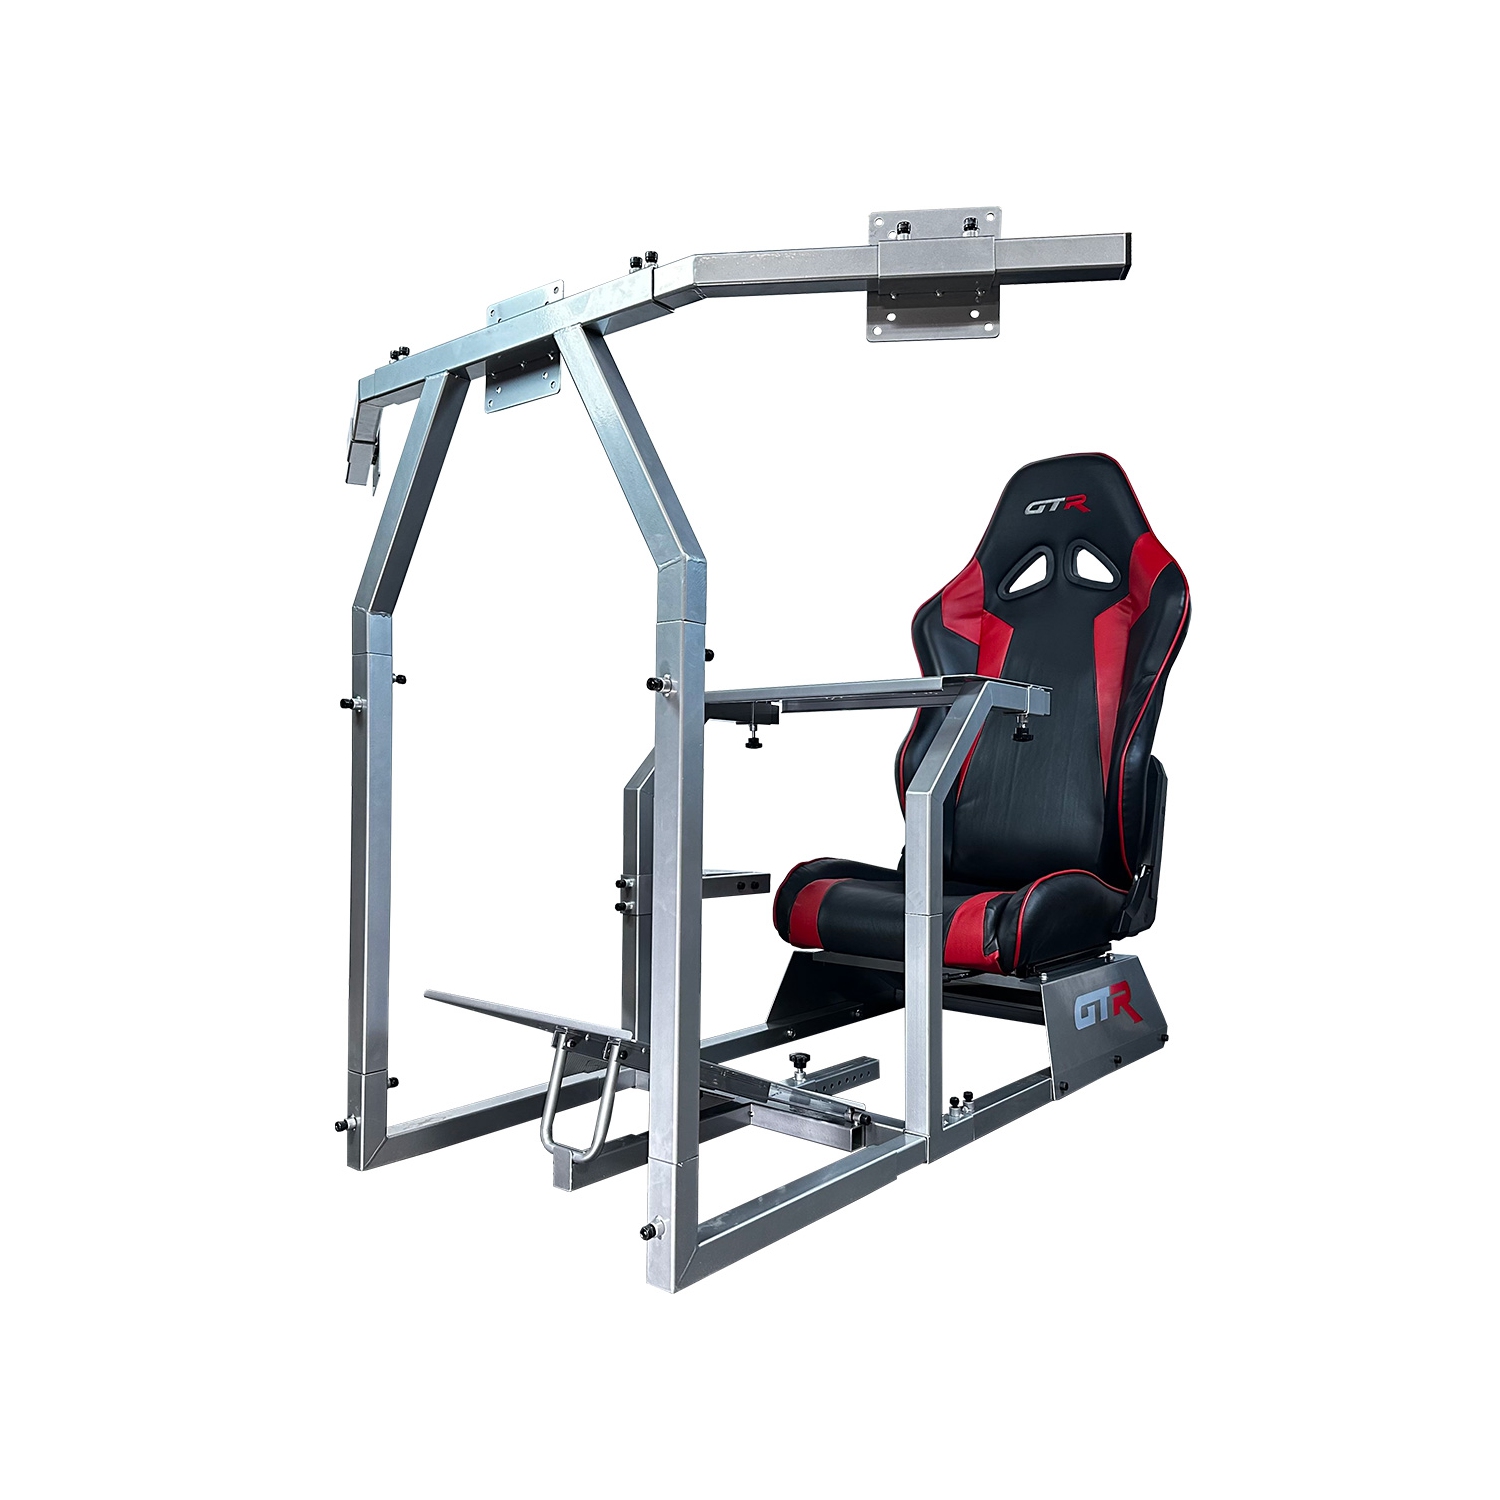 GTR Simulator GTA-F Model (Silver) Triple or Single Monitor Stand with Black/Red Adjustable Leatherette Seat